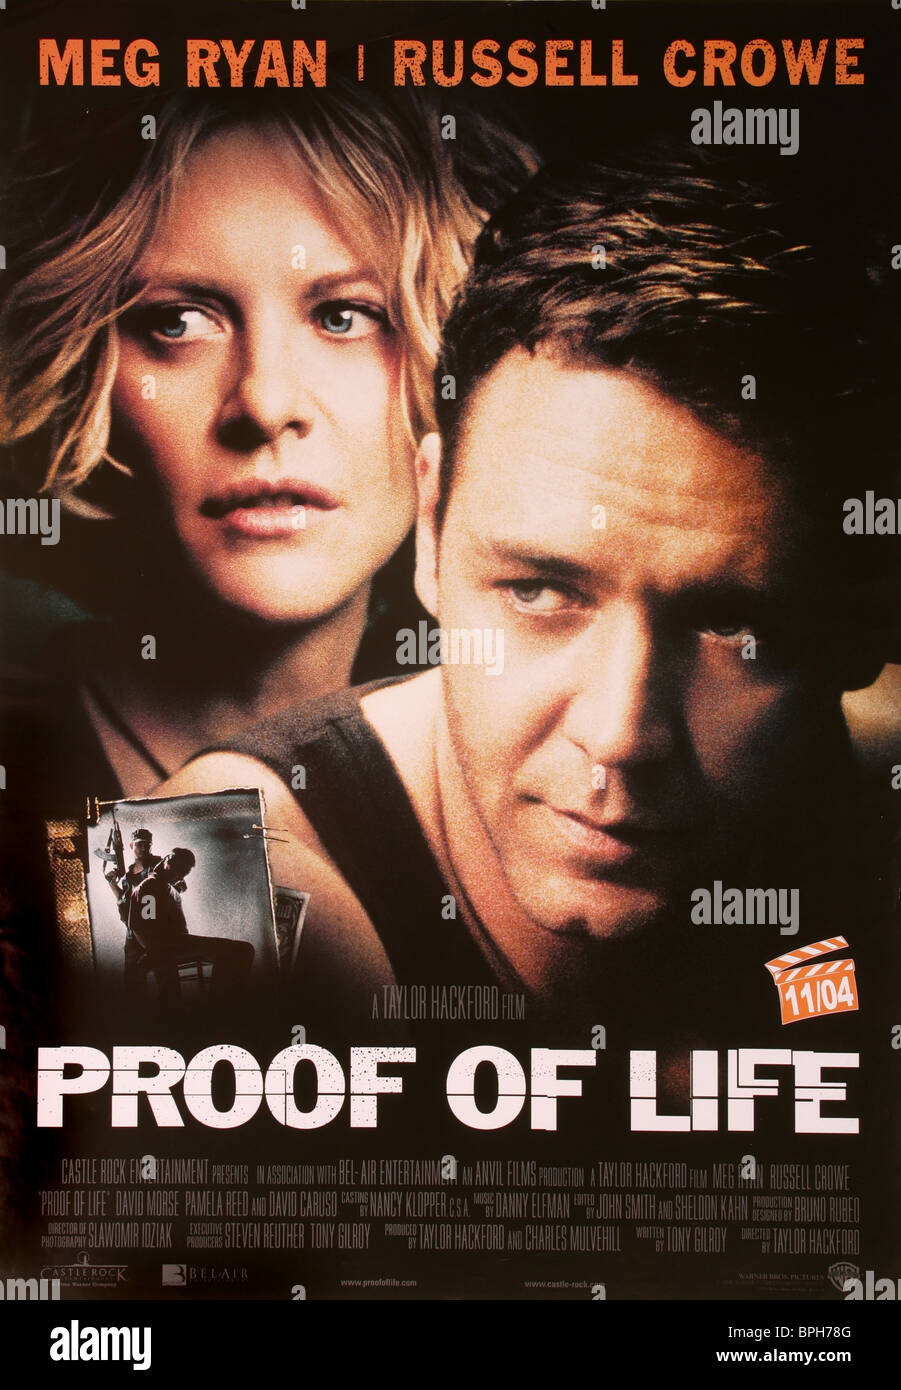 MEG RYAN, RUSSELL CROWE POSTER, PROOF OF LIFE, 2000 Stock Photo - Alamy - Film Meg Ryan Et Russell Crow